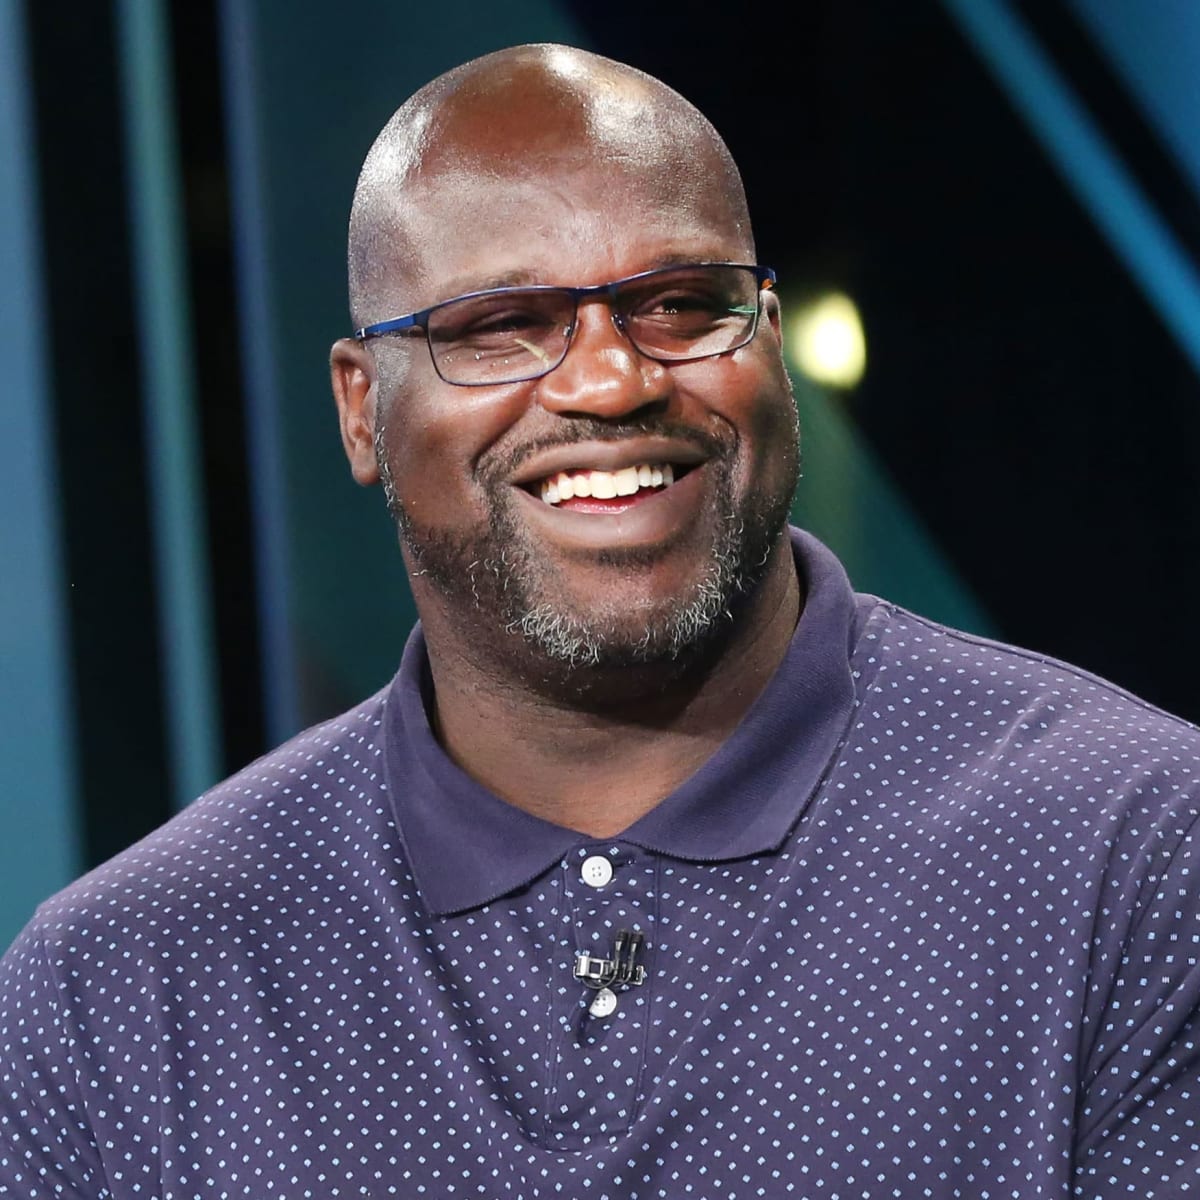 An Iconic Shaquille O'Neal Moment Overshadowed a Record-Setting